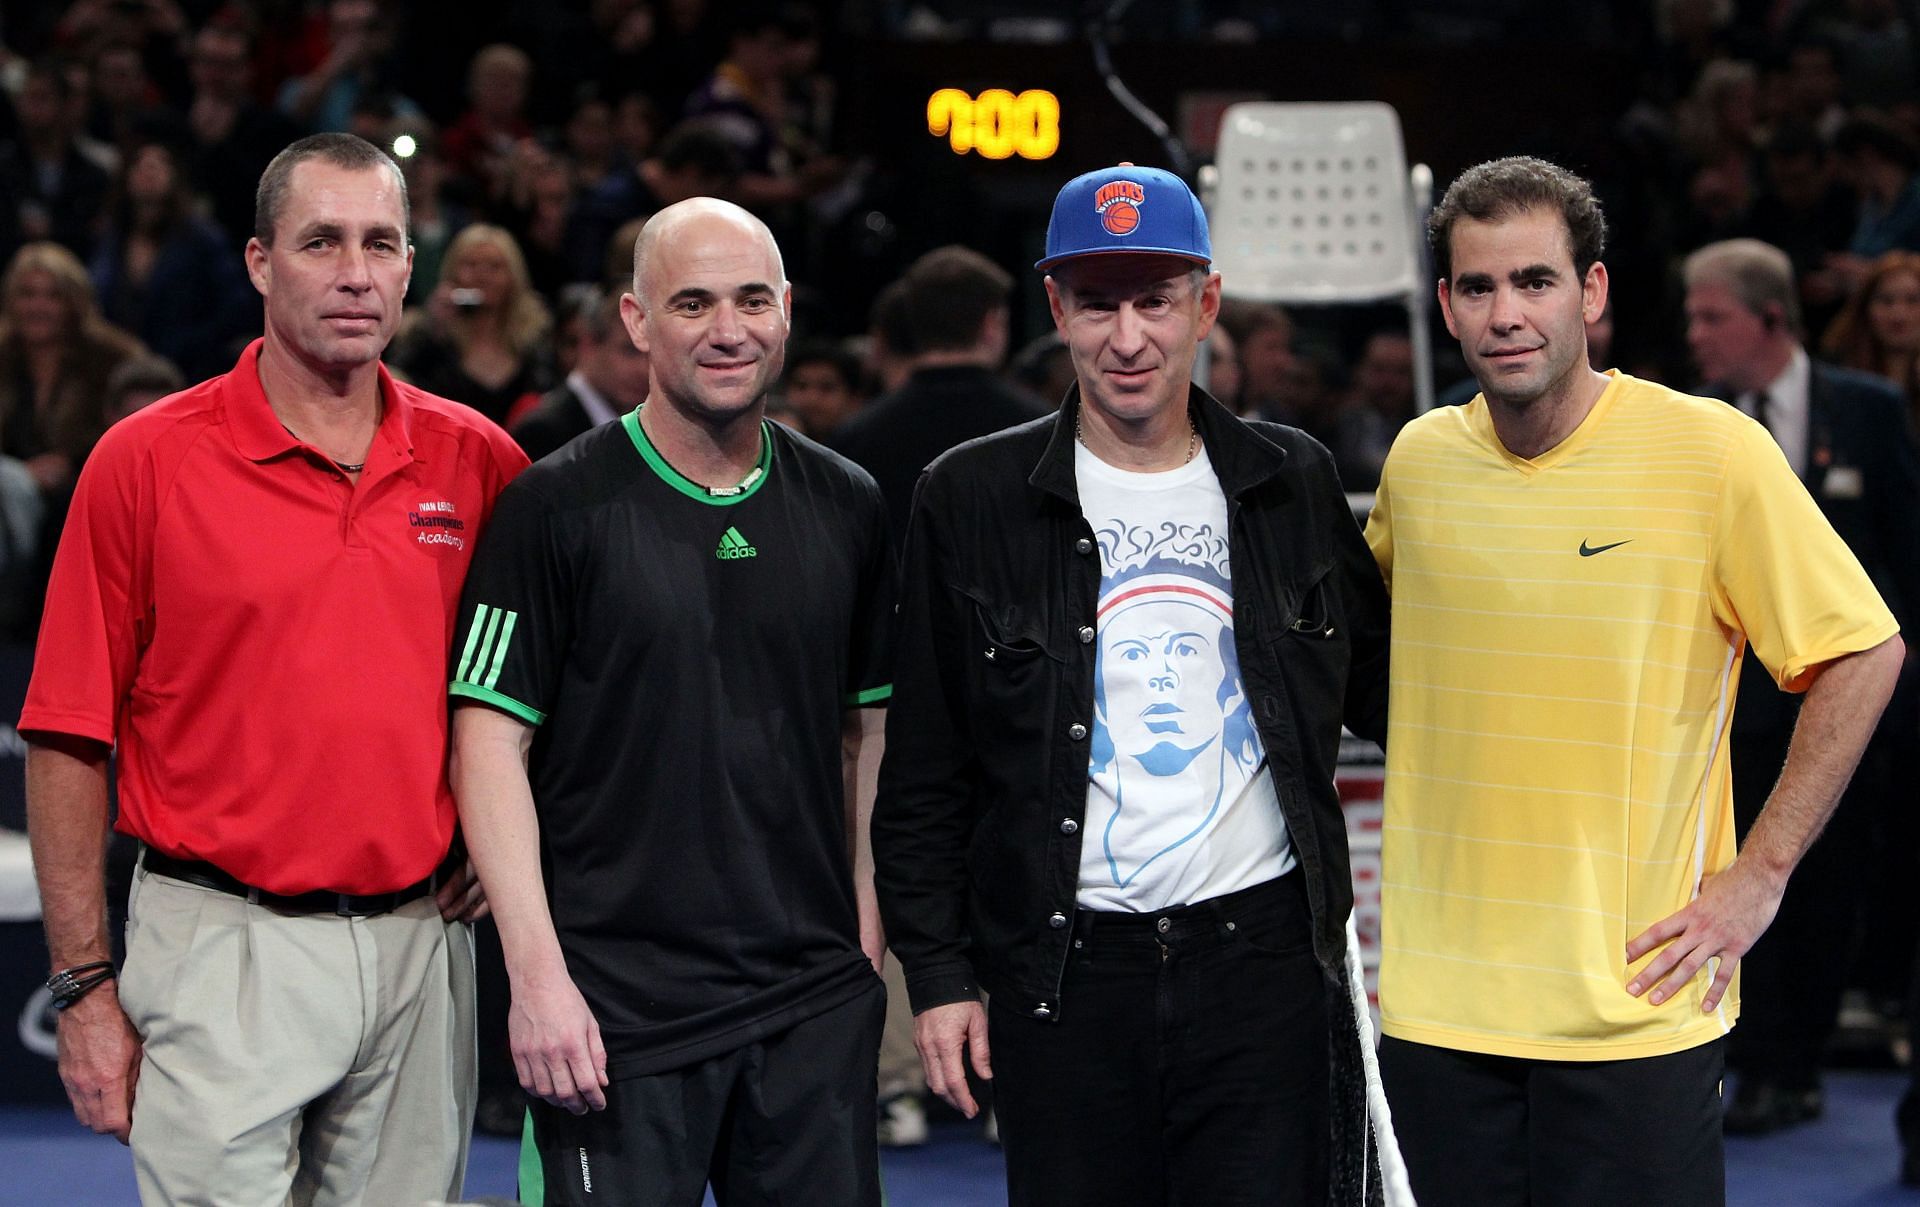 Andre Agassi (second from left) with Pete Sampras (extreme right)